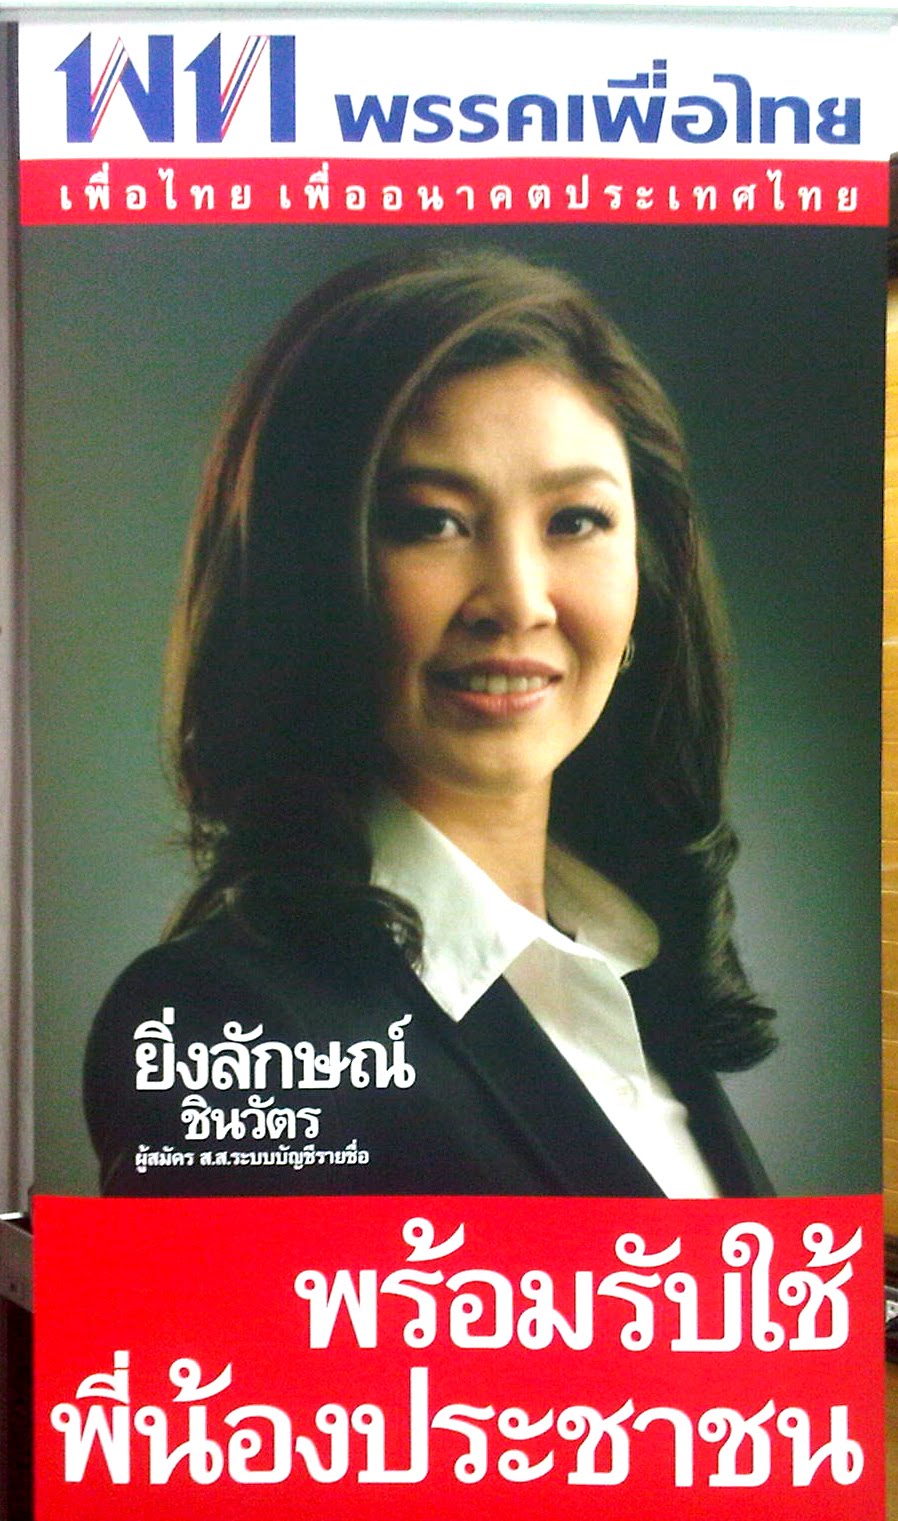 Yingluck Shinawatra First Female Prime Minister of Thailand